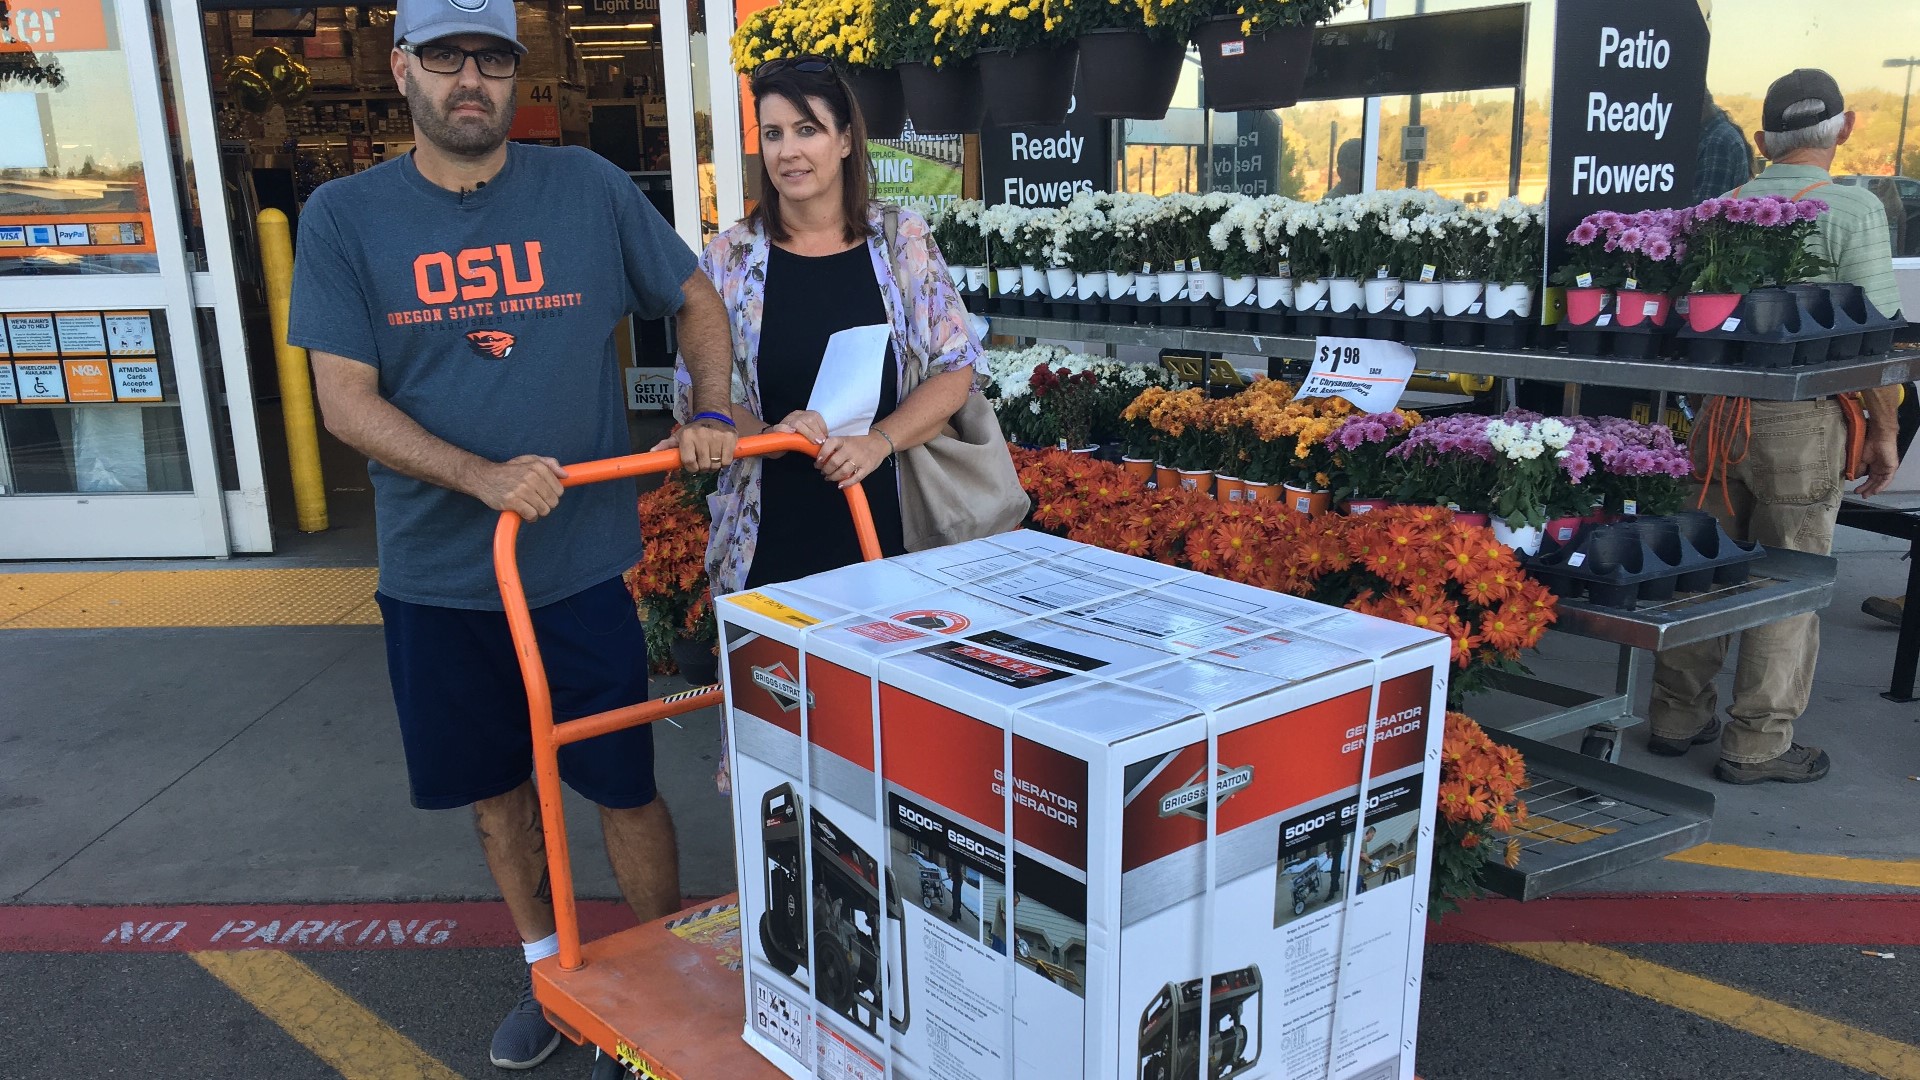 The PG&E power shutoffs caused blackouts in Auburn. Some people in town sought generators to weather the shutoff while others tried to keep their good times going.